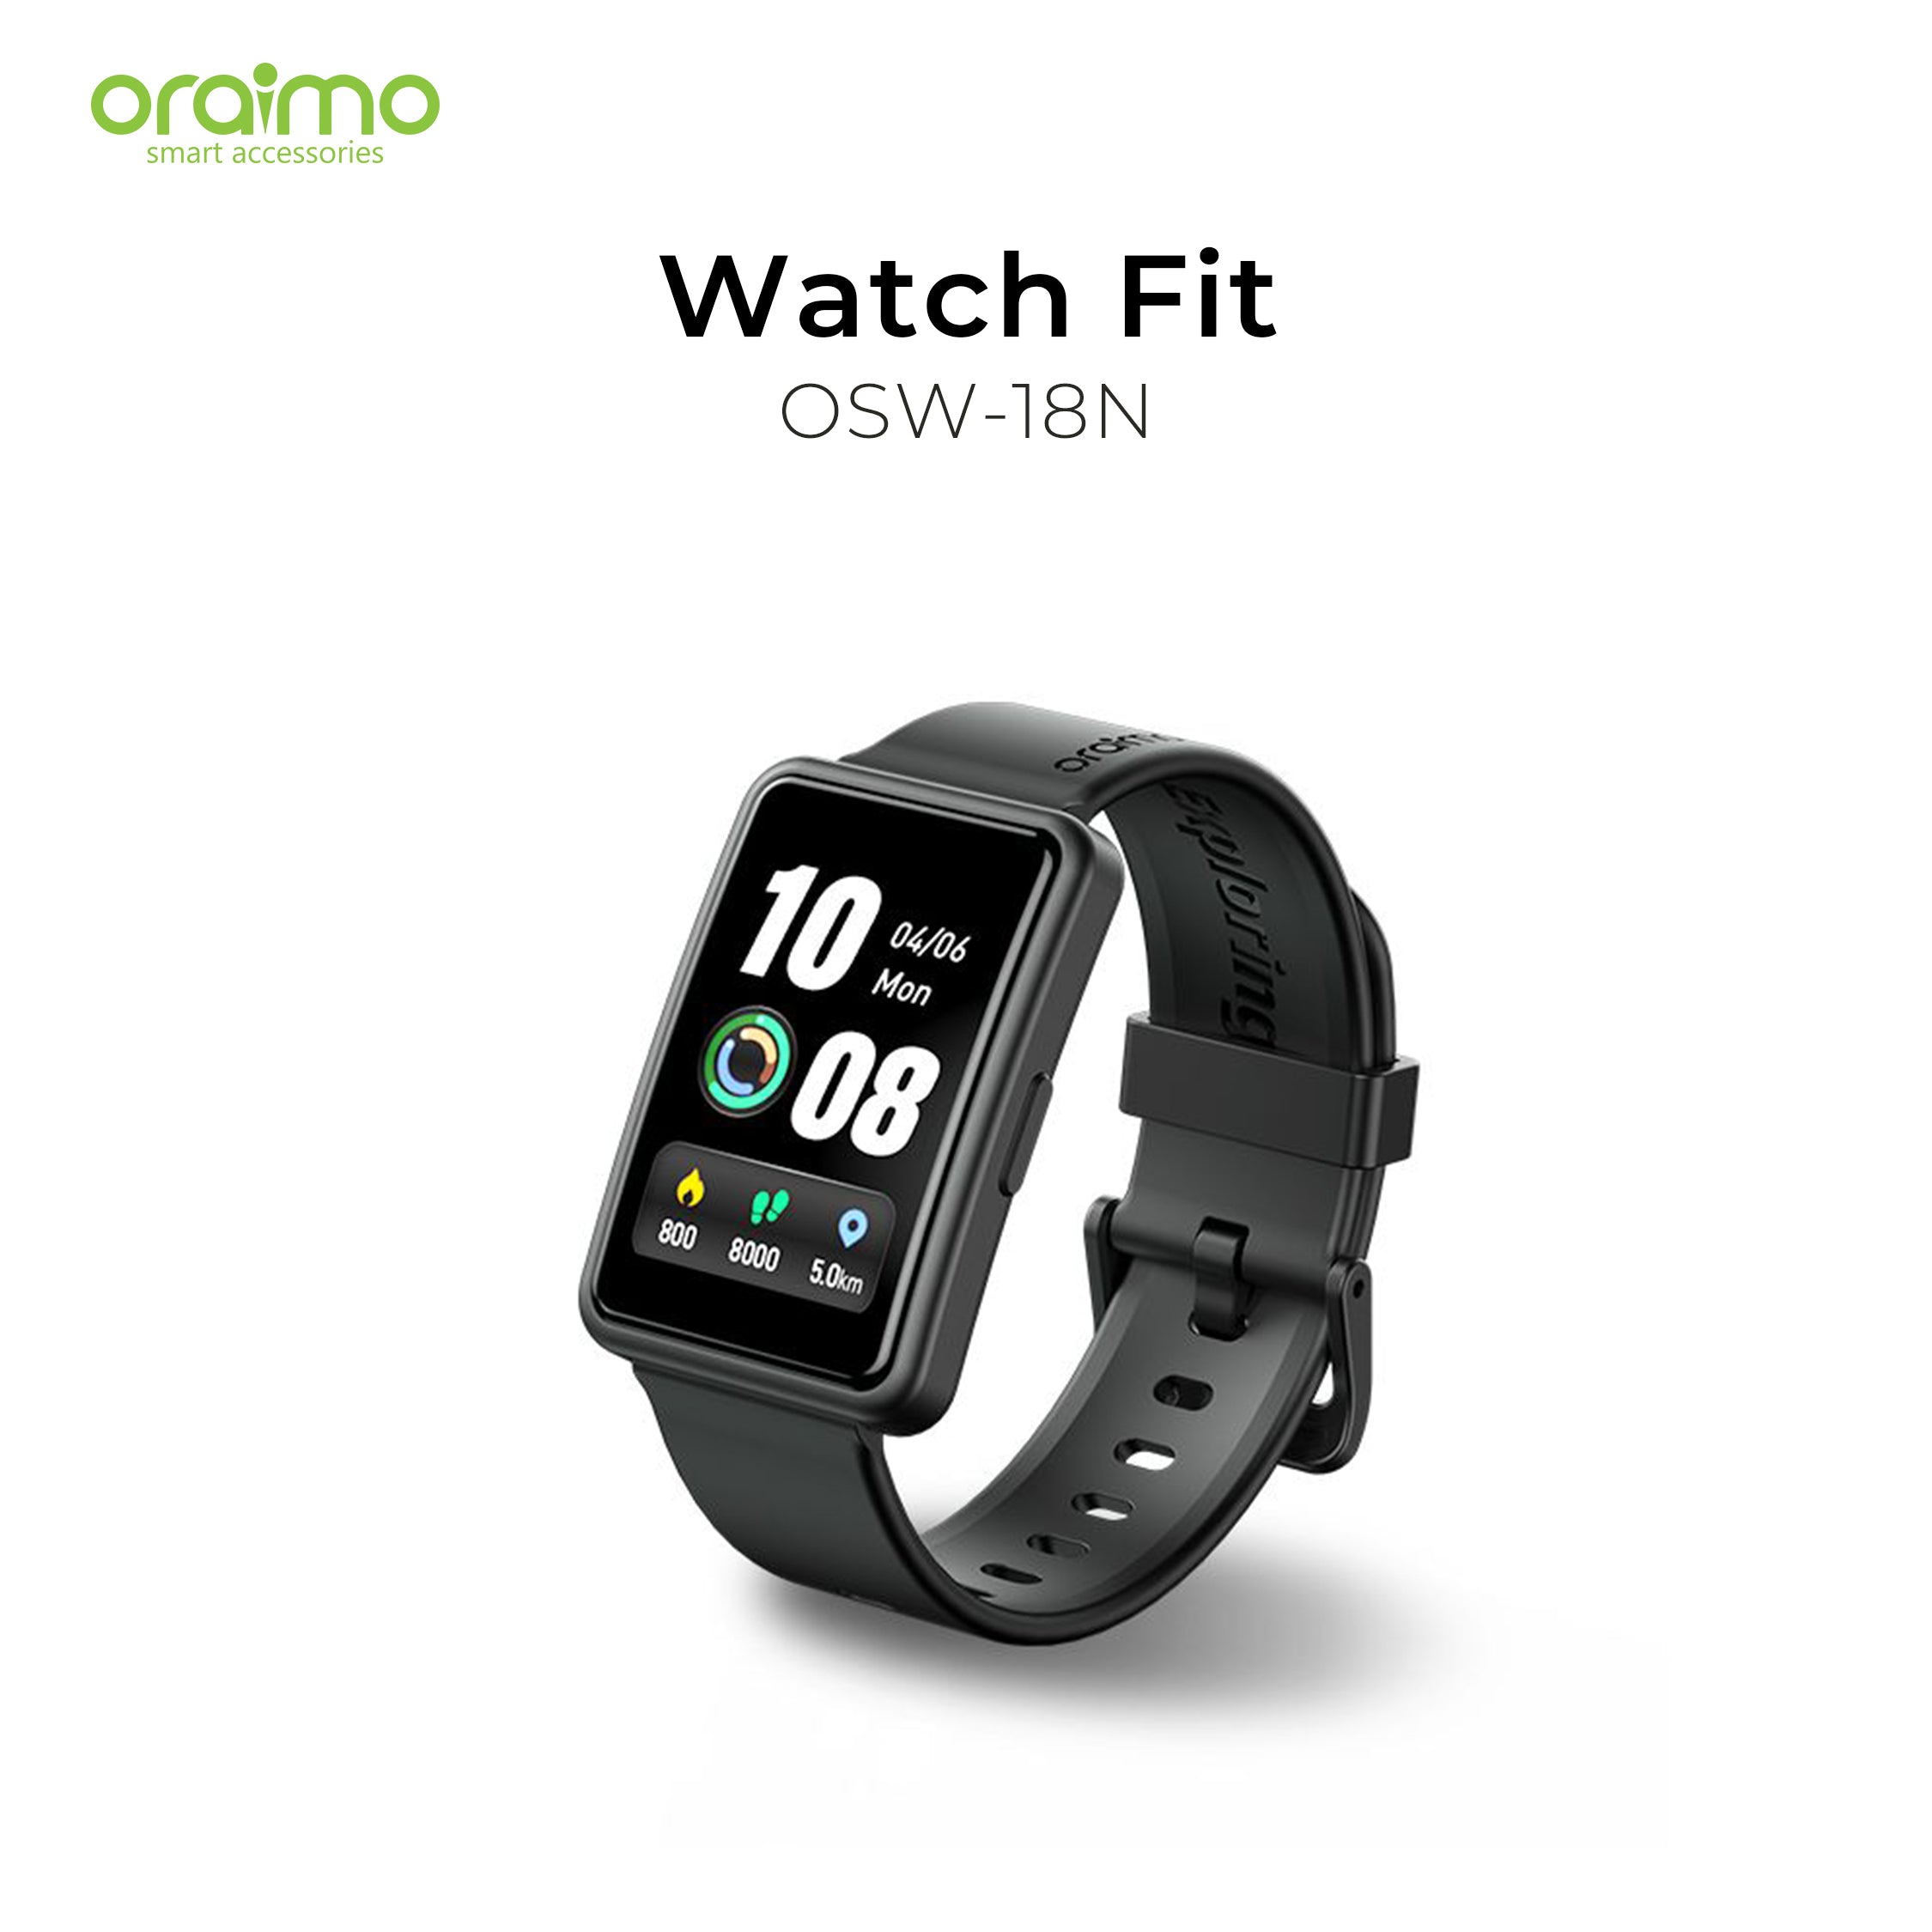 Oraimo Watch Fit OSW-18N